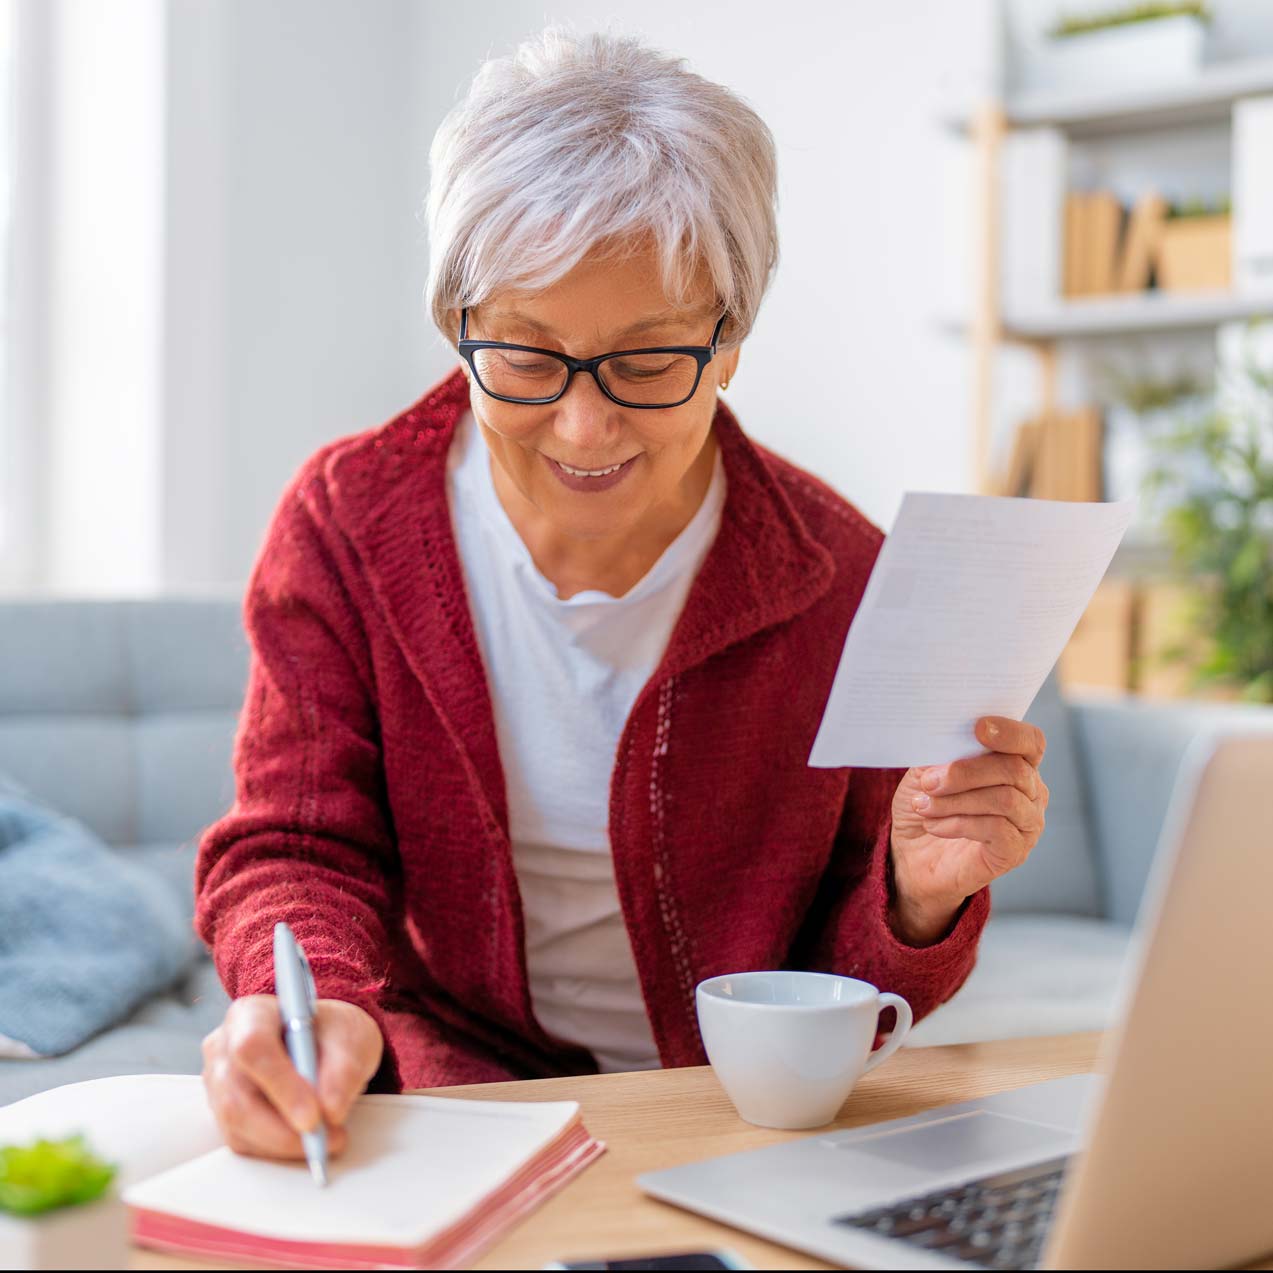 An elderly woman with short grey hair and glasses sits at a table, holding a piece of paper in one hand and writing in a notebook with the other. She is dressed in a red sweater and smiles as she works. A white coffee cup and a laptop are on the table.